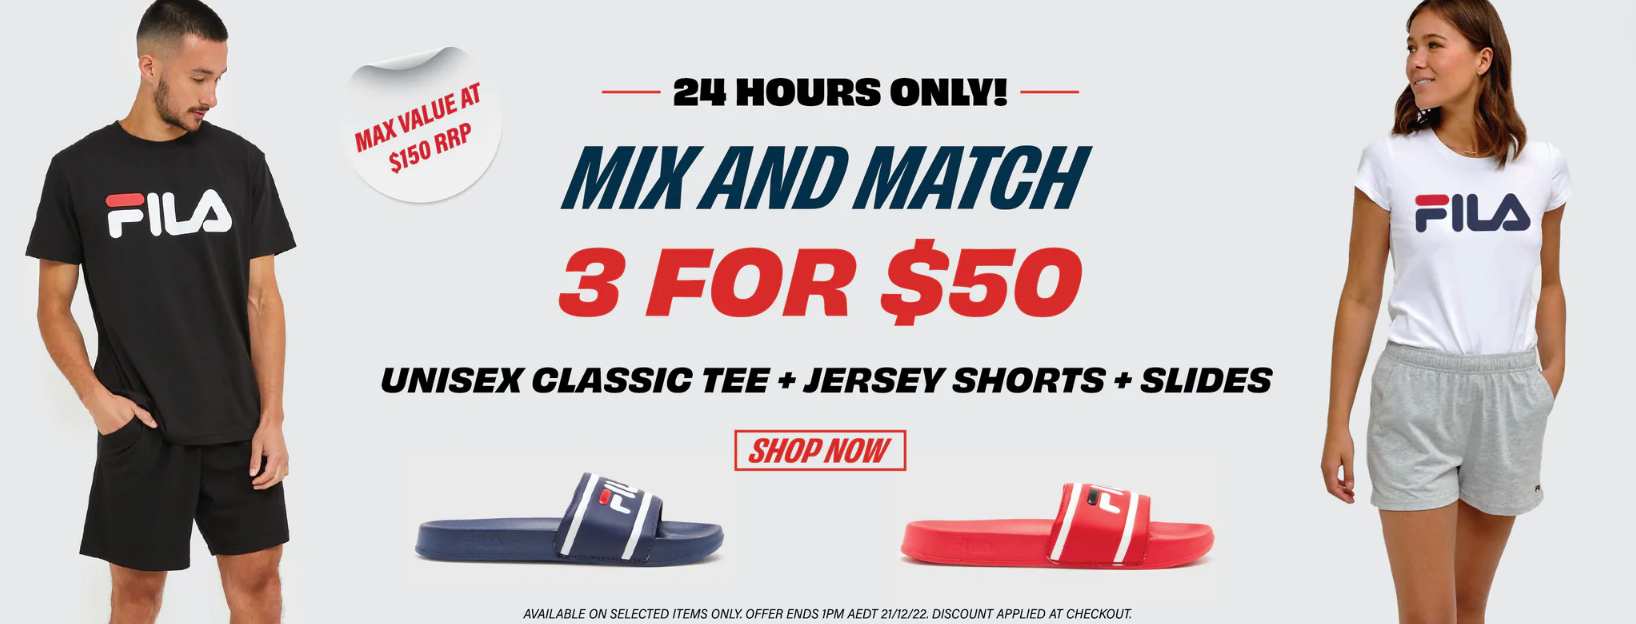 Fila 1-Day sale: 3(Unisex Classic tee + Jersey shorts + slides) for $50